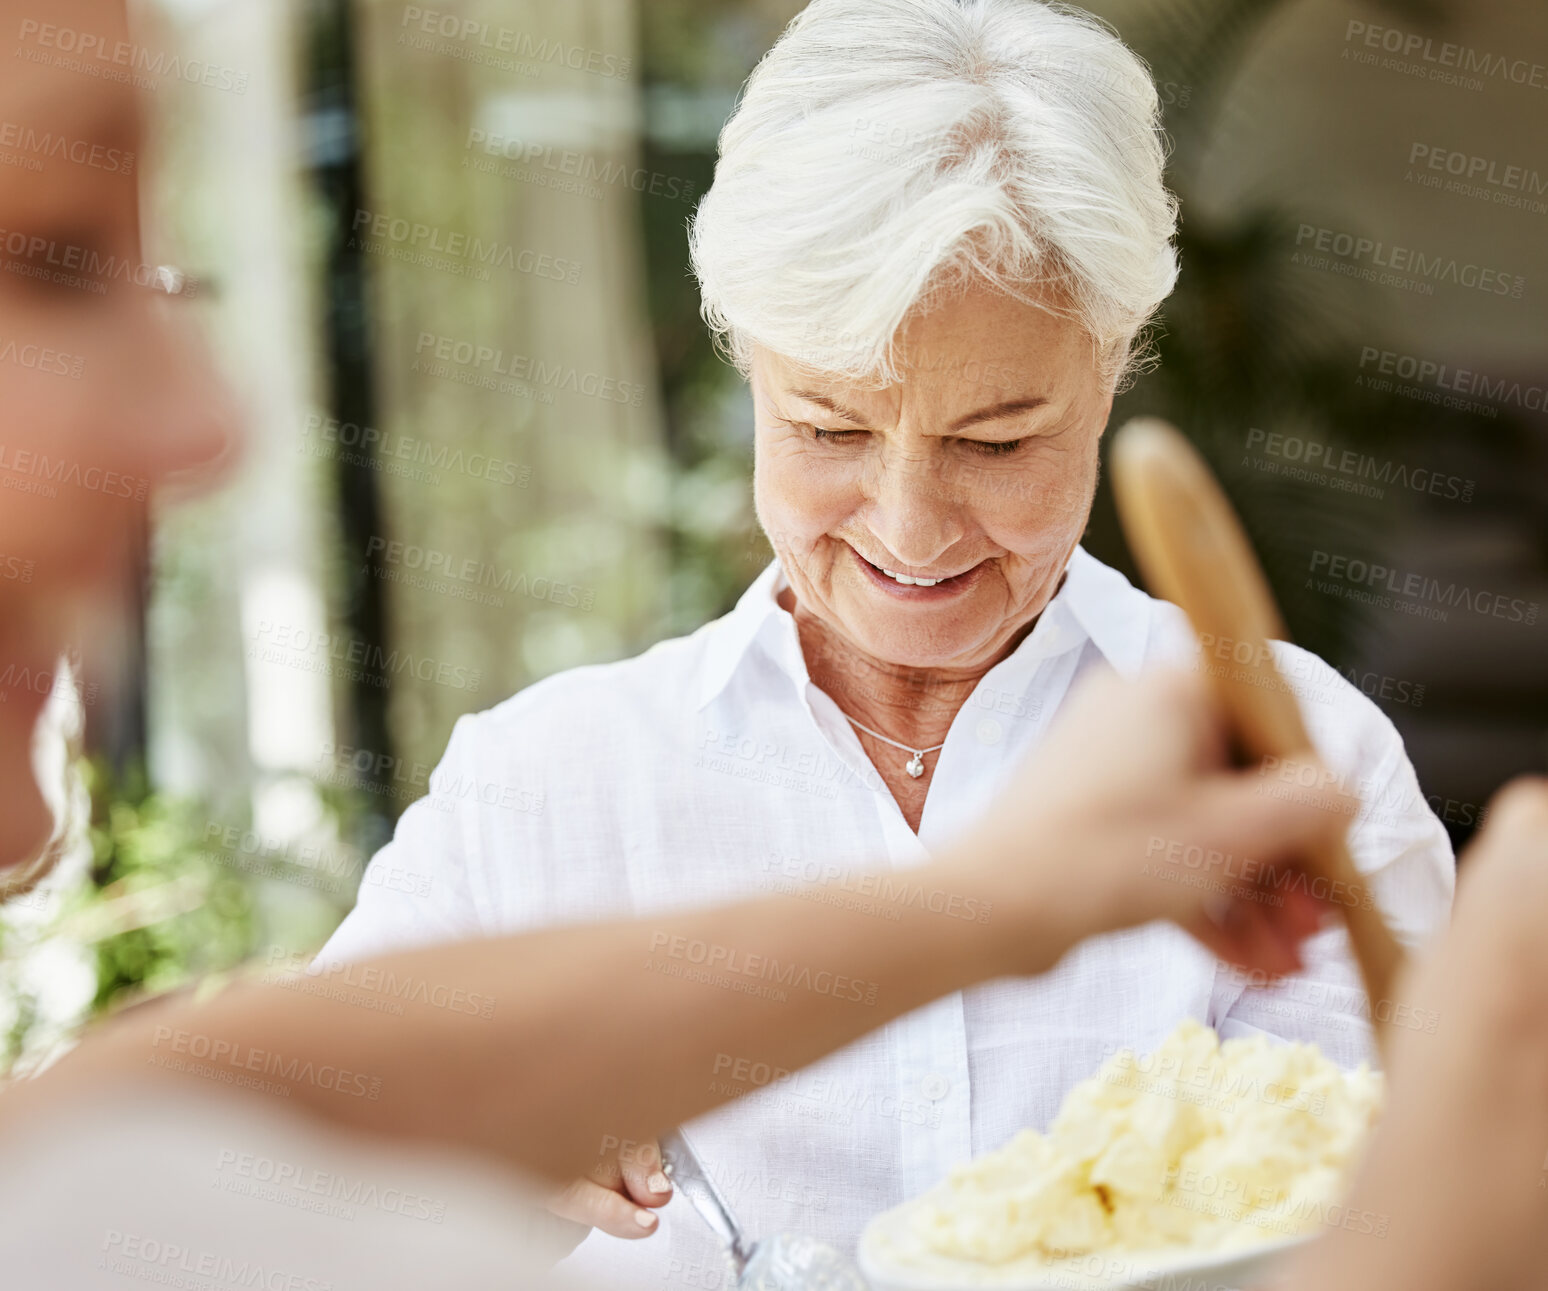 Buy stock photo Shot of a senior woman enjoying a meal with family